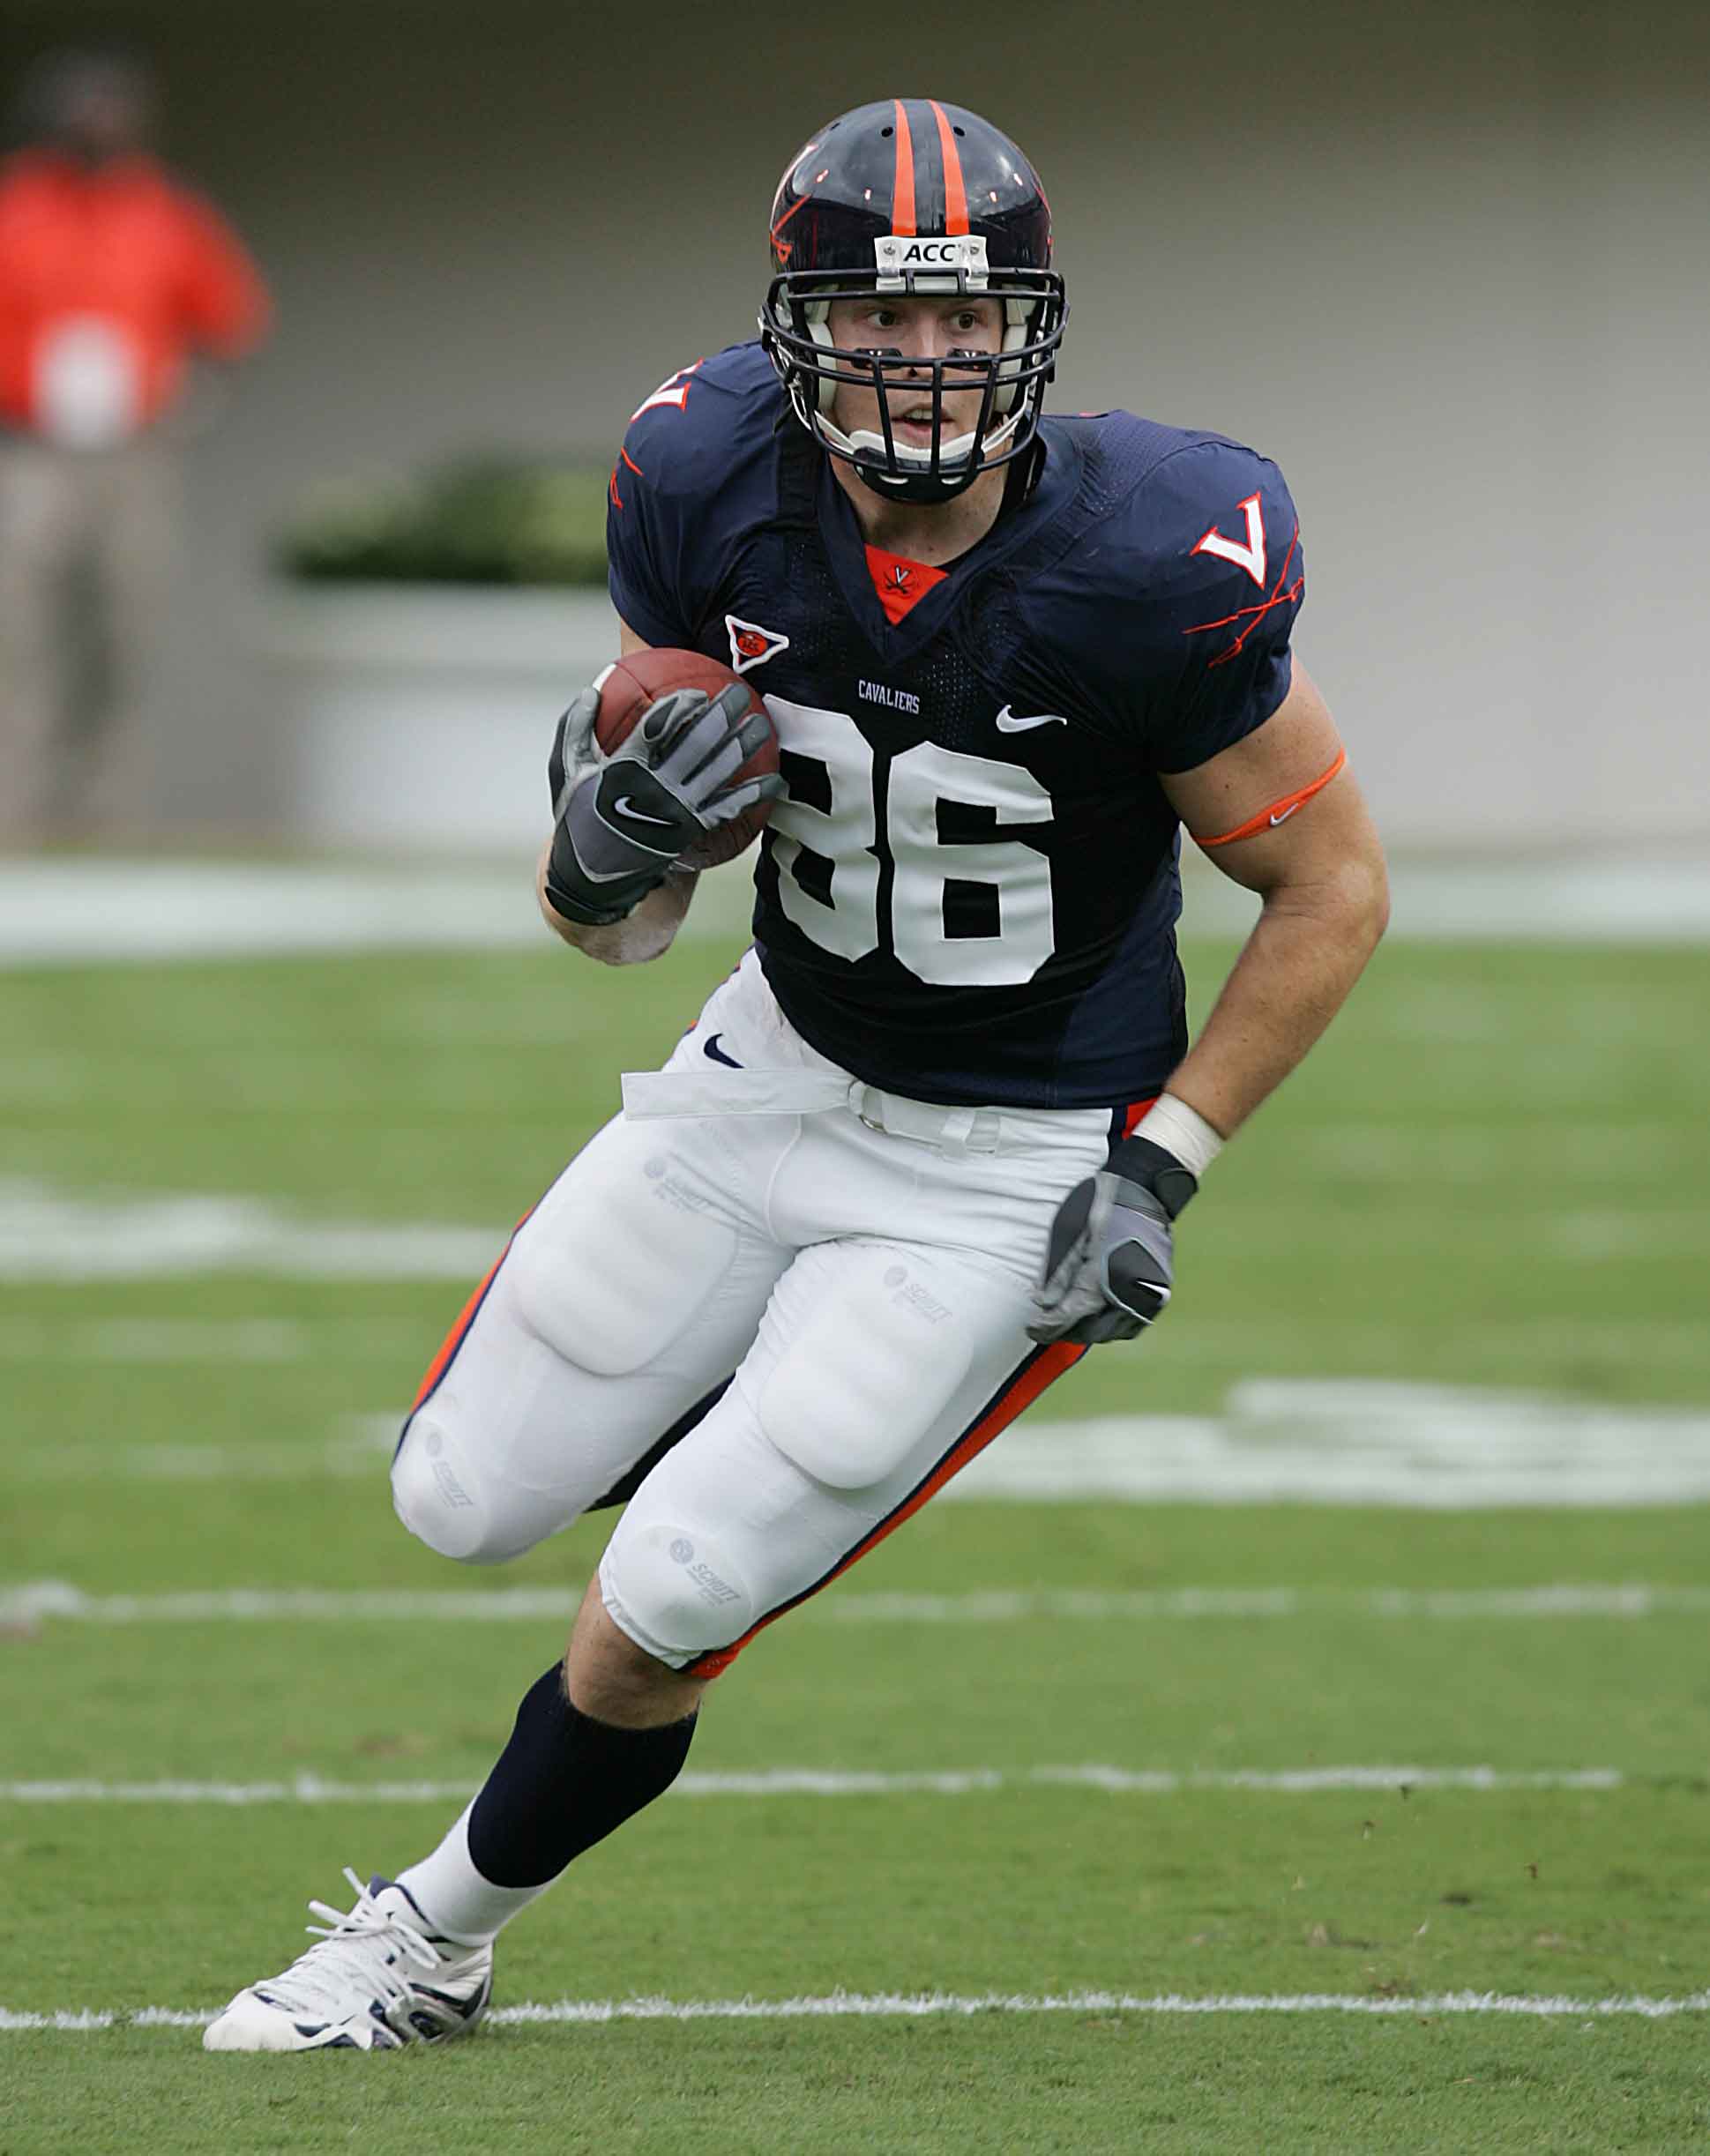 Tom Santi starred while at UVA, earning a spot with the NFL’s Indianapolis Colts.